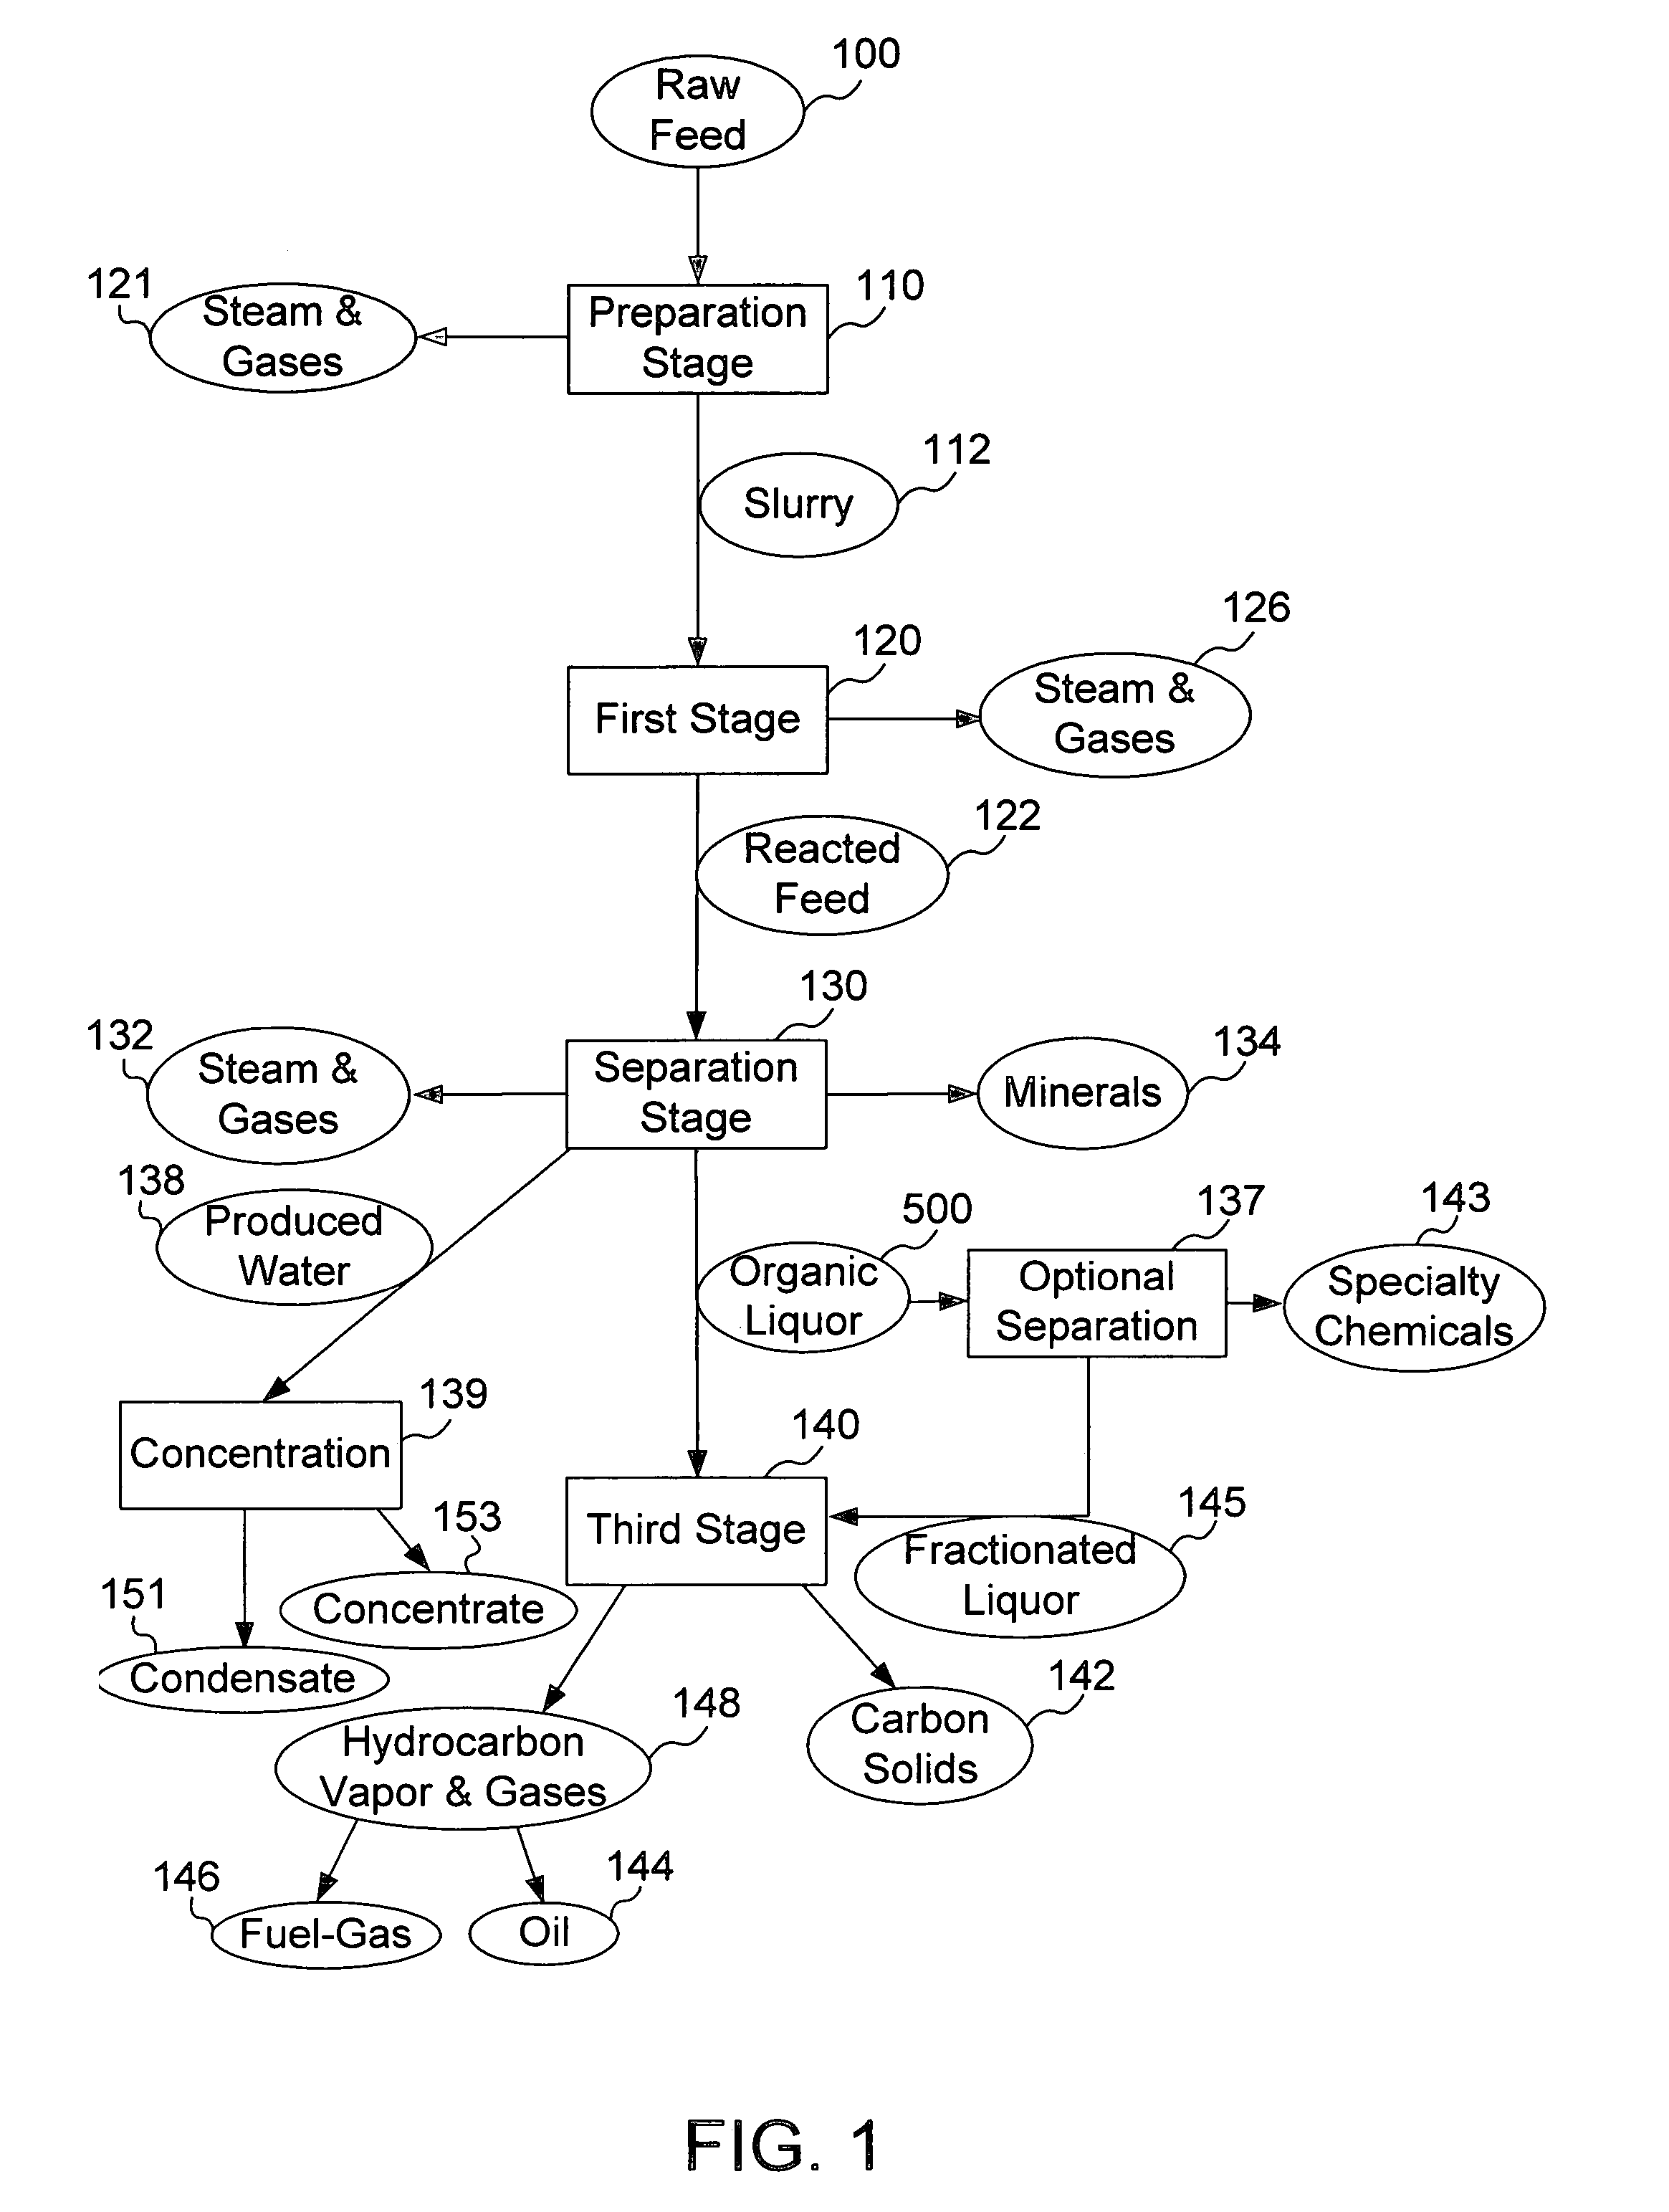 Apparatus and process for converting a mixture of organic materials into hydrocarbons and carbon solids